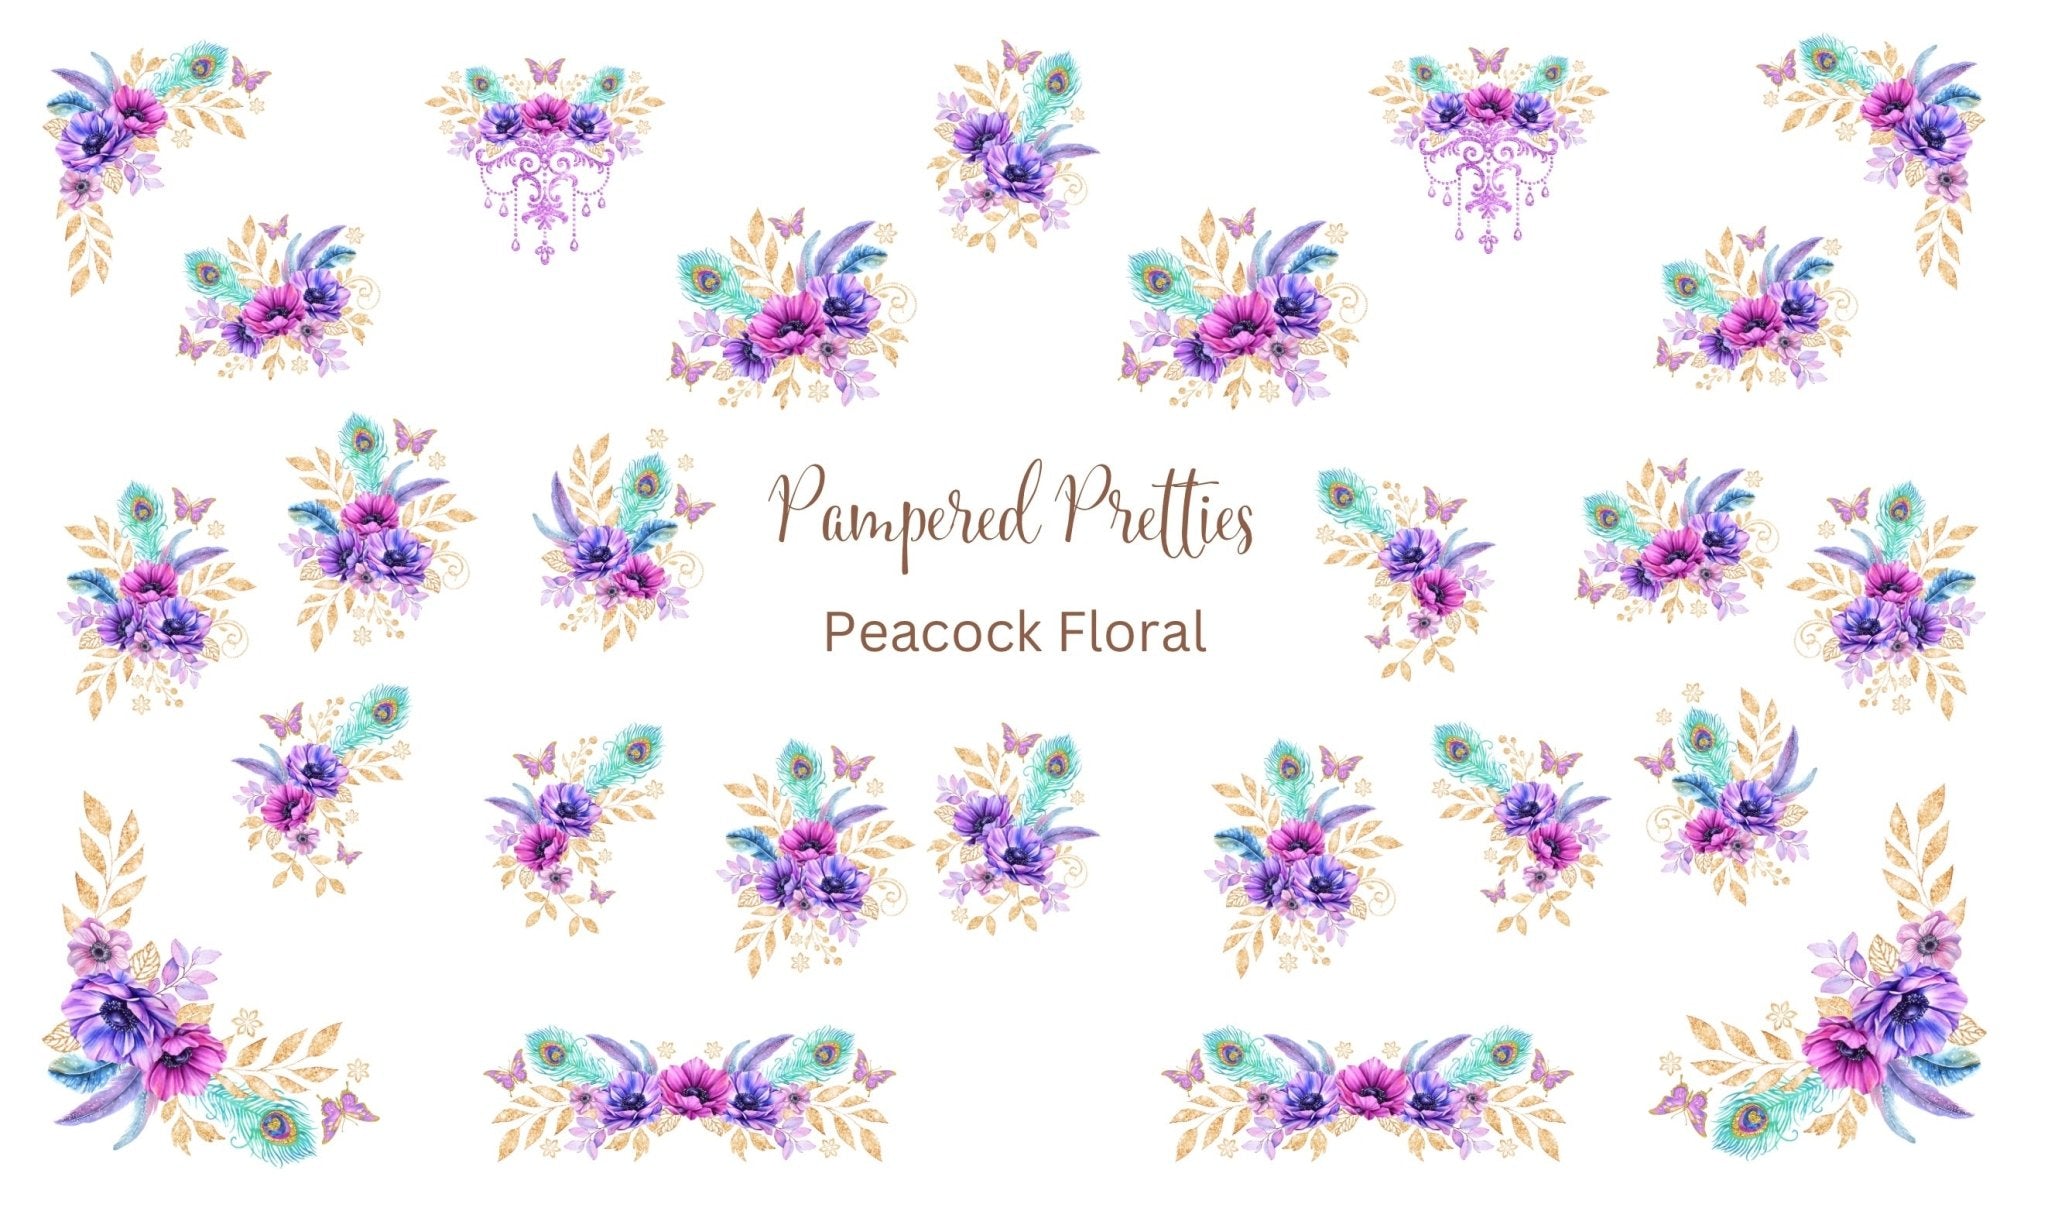 Peacock Florals - Pampered Pretties